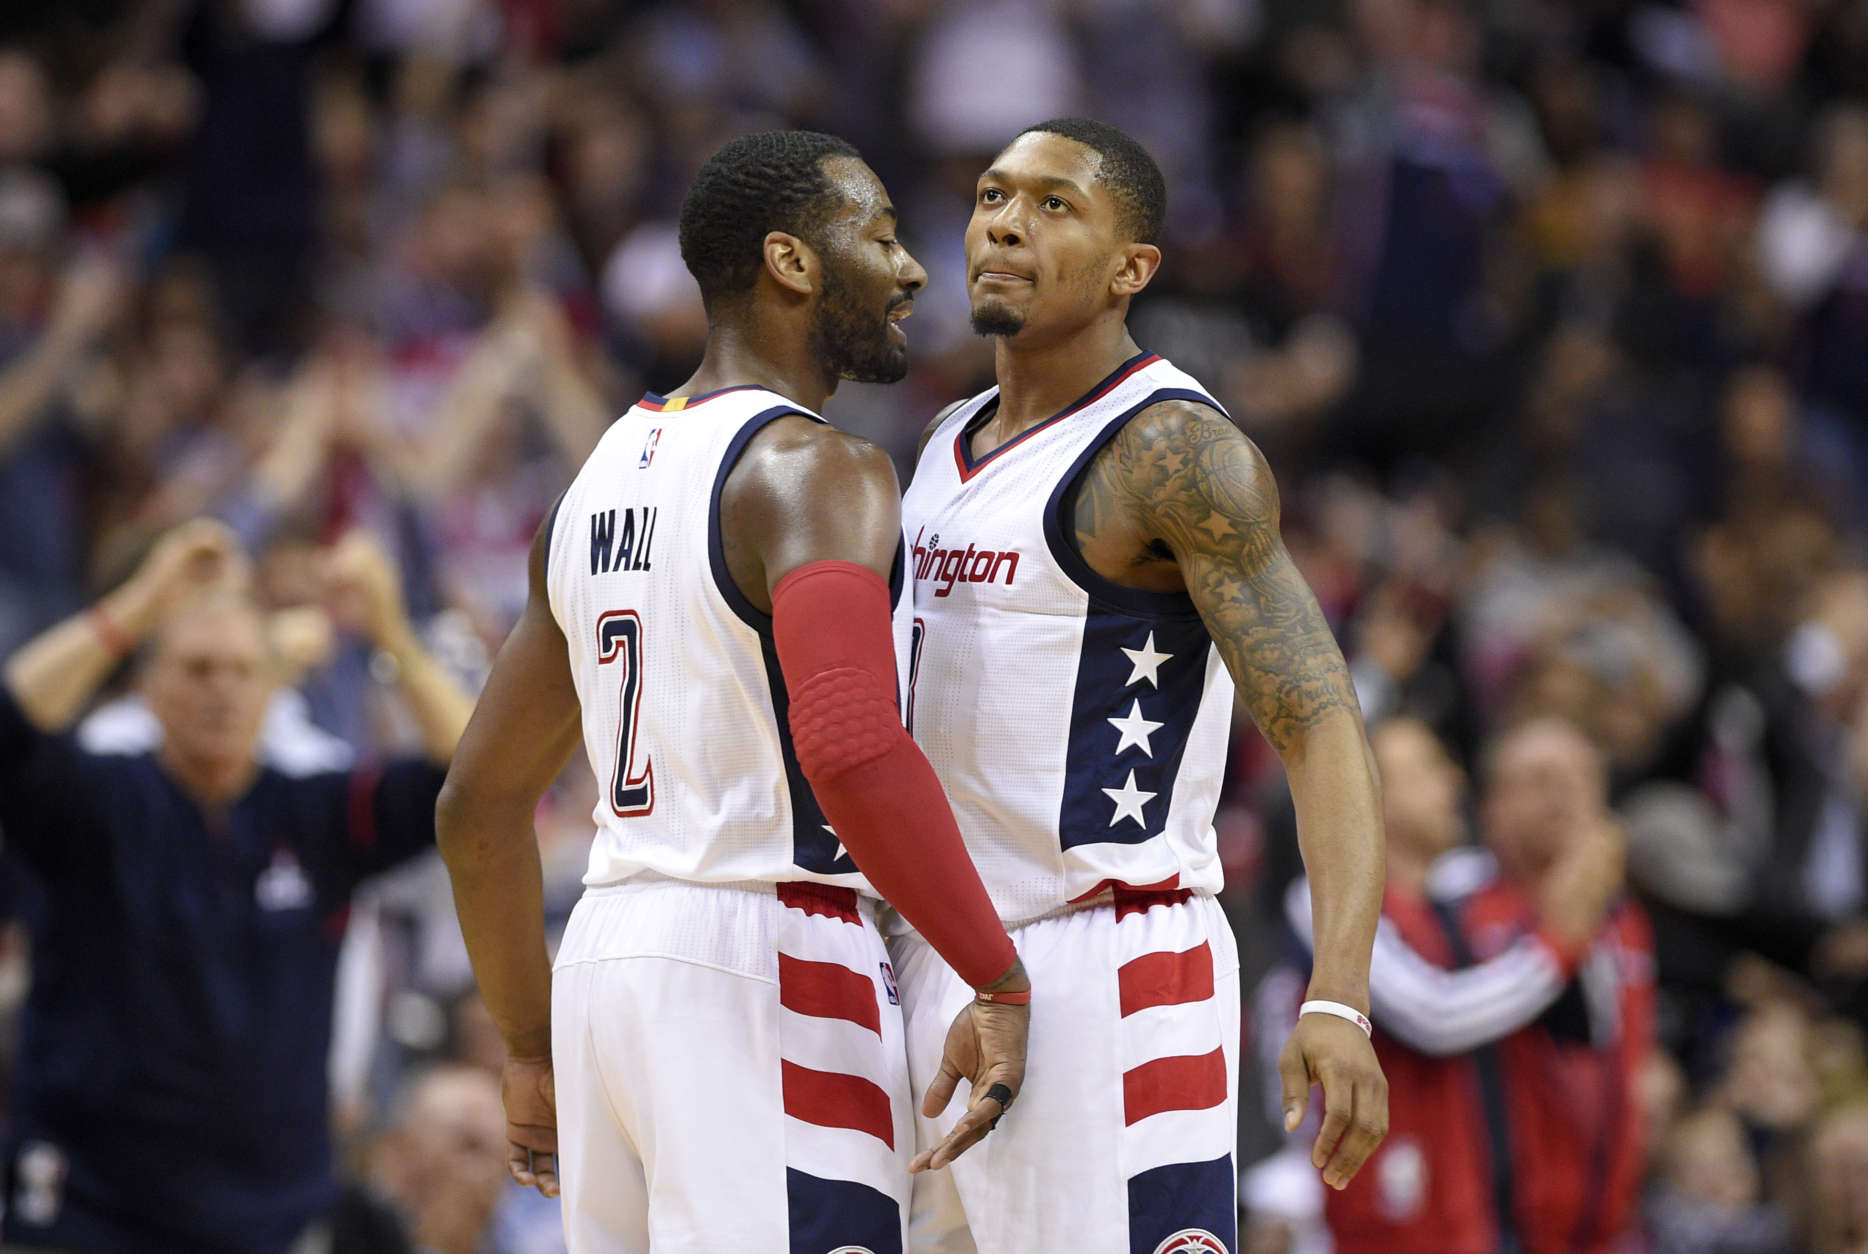 Washington Wizards guards John Wall (2) and guard Bradley Beal chest-bump during the second half in Game 5 of the team's first-round NBA basketball playoff series against the Atlanta Hawks, Wednesday, April 26, 2017, in Washington. The Wizards won 103-99. (AP Photo/Nick Wass)